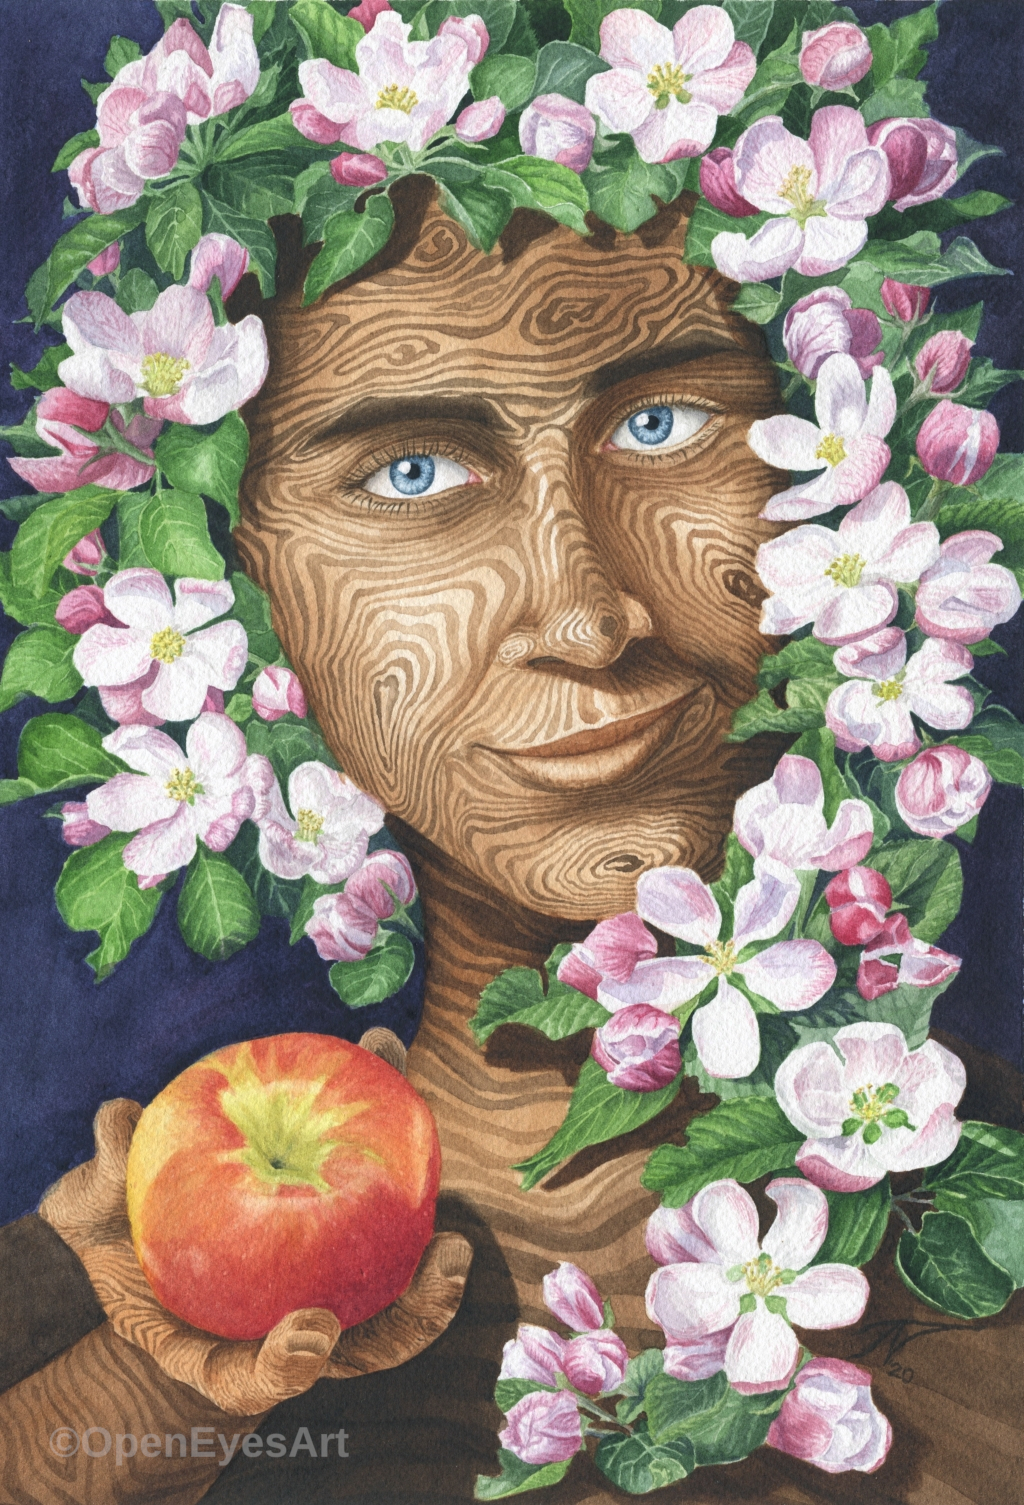 painting of apple dryad